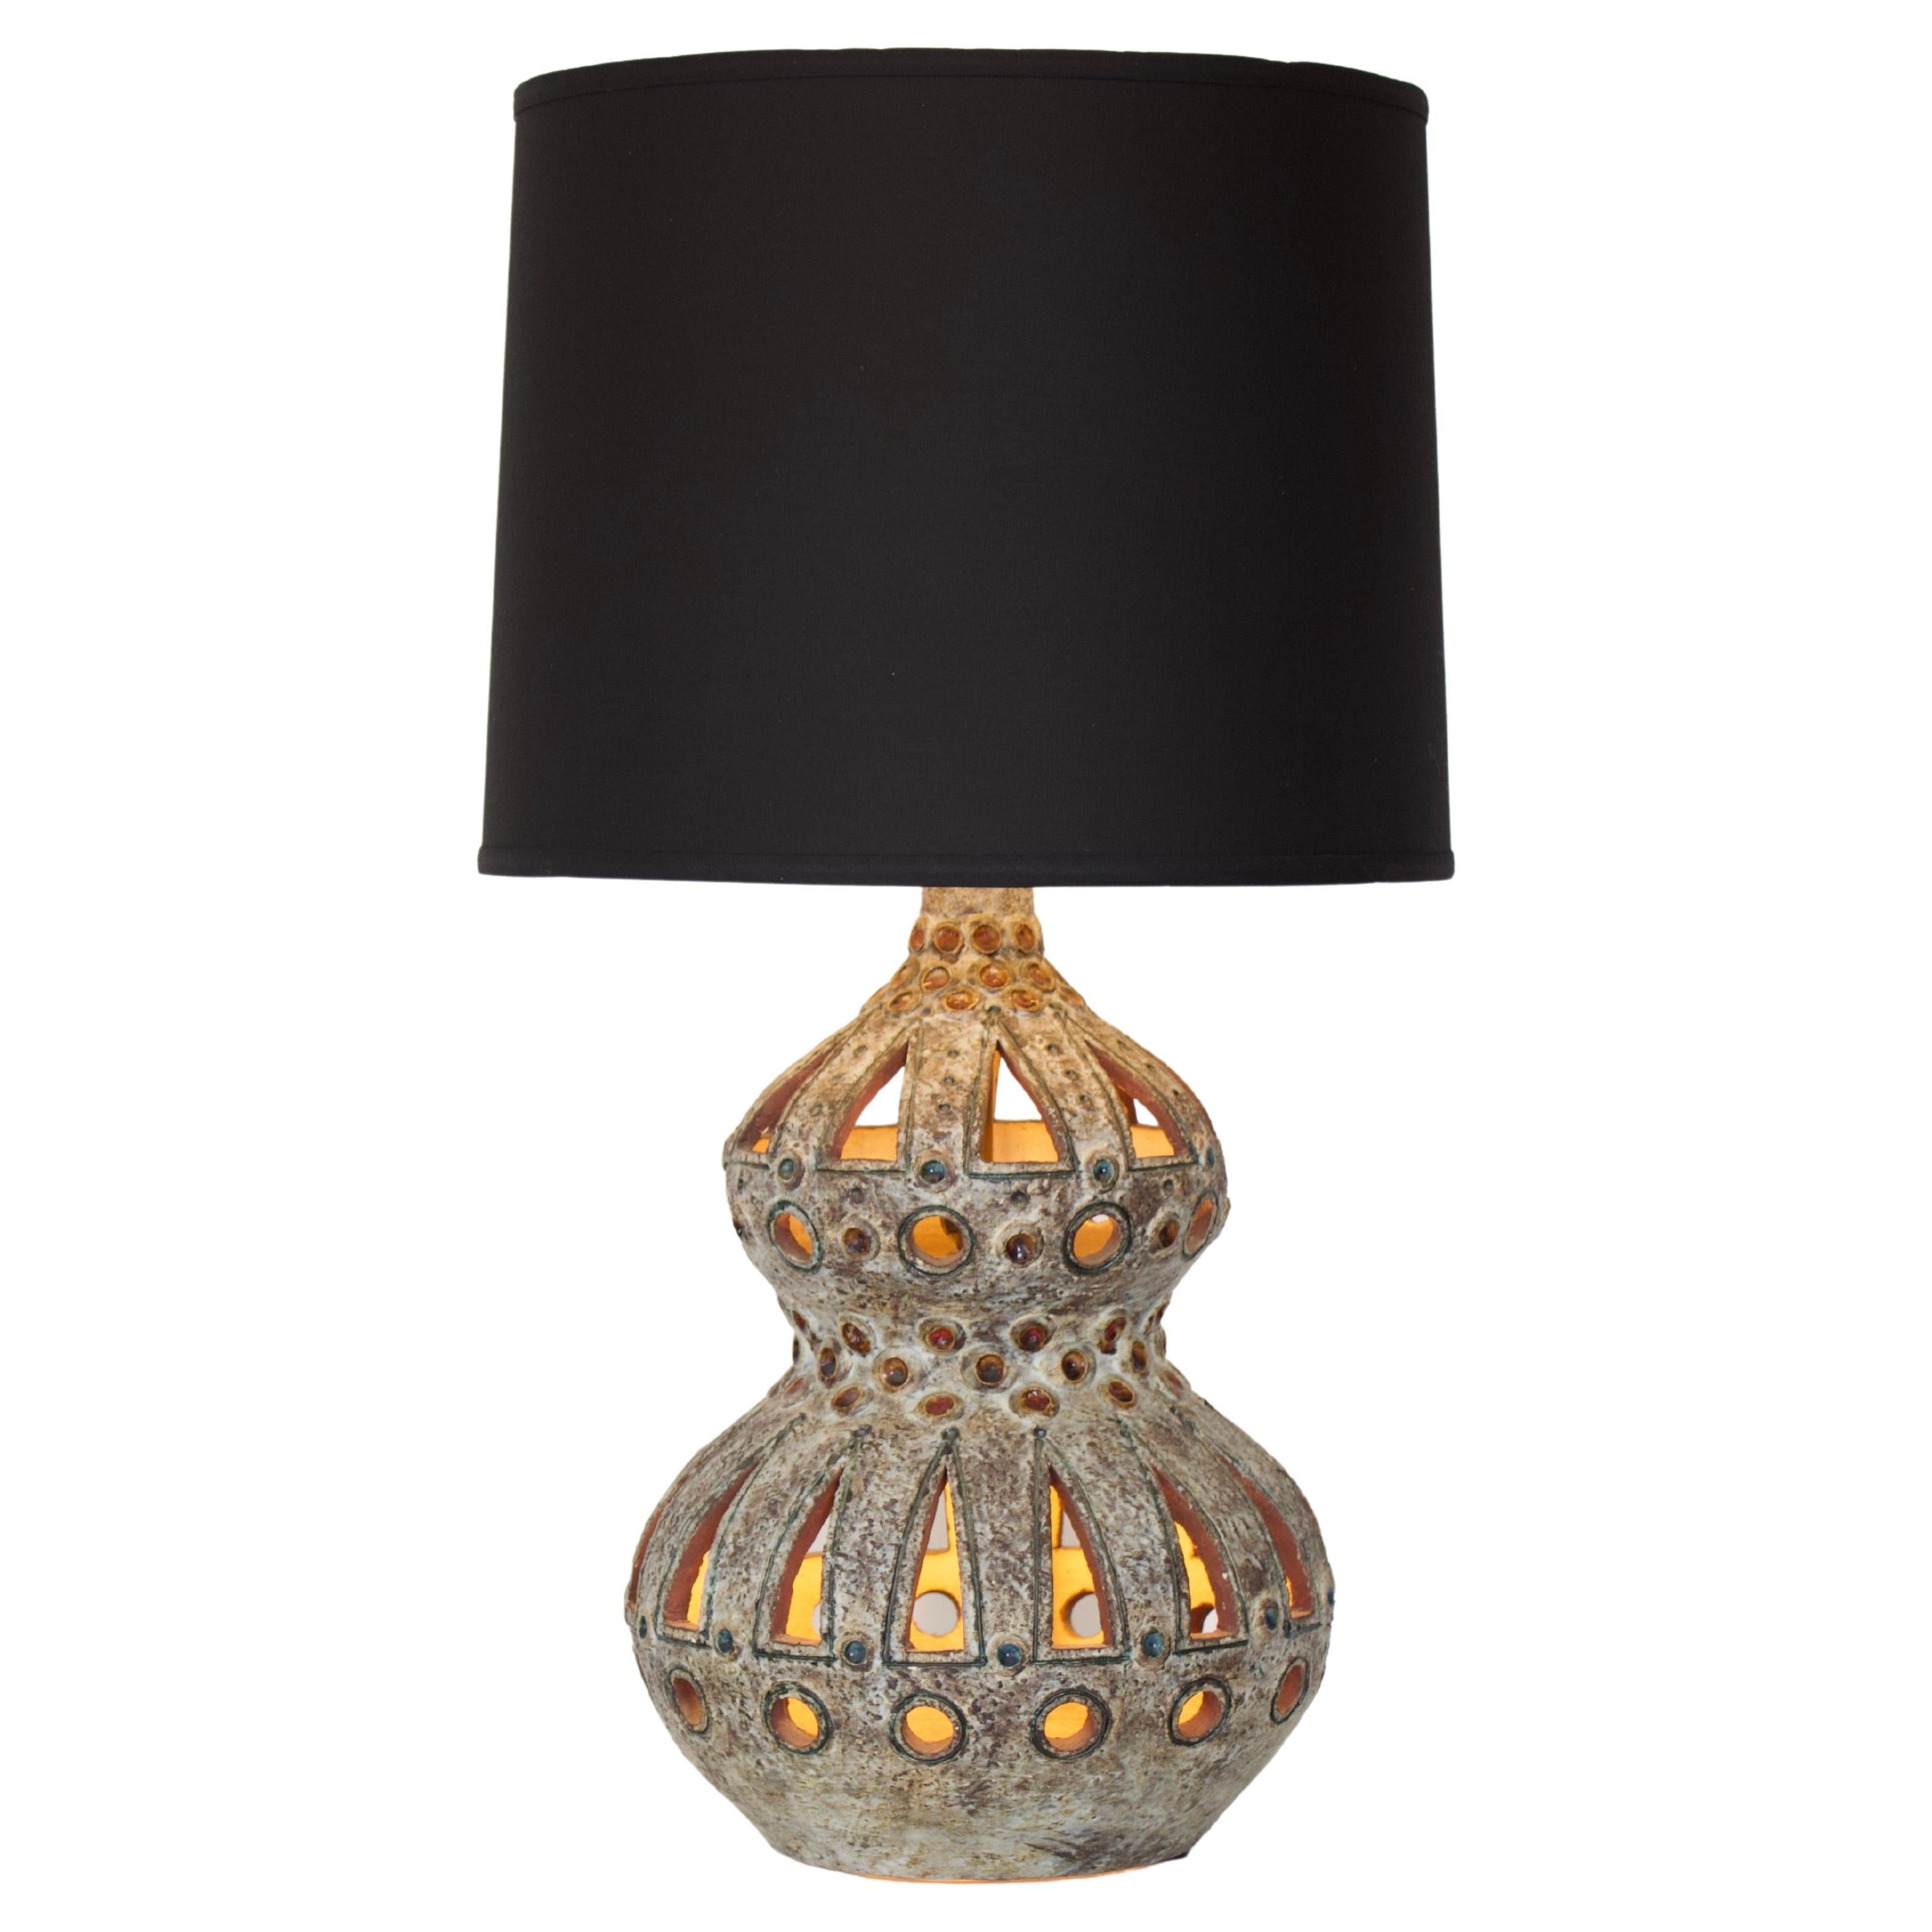 Raphaël Giarrusso French Pierced and Glazed Ceramic Table Lamp For Sale